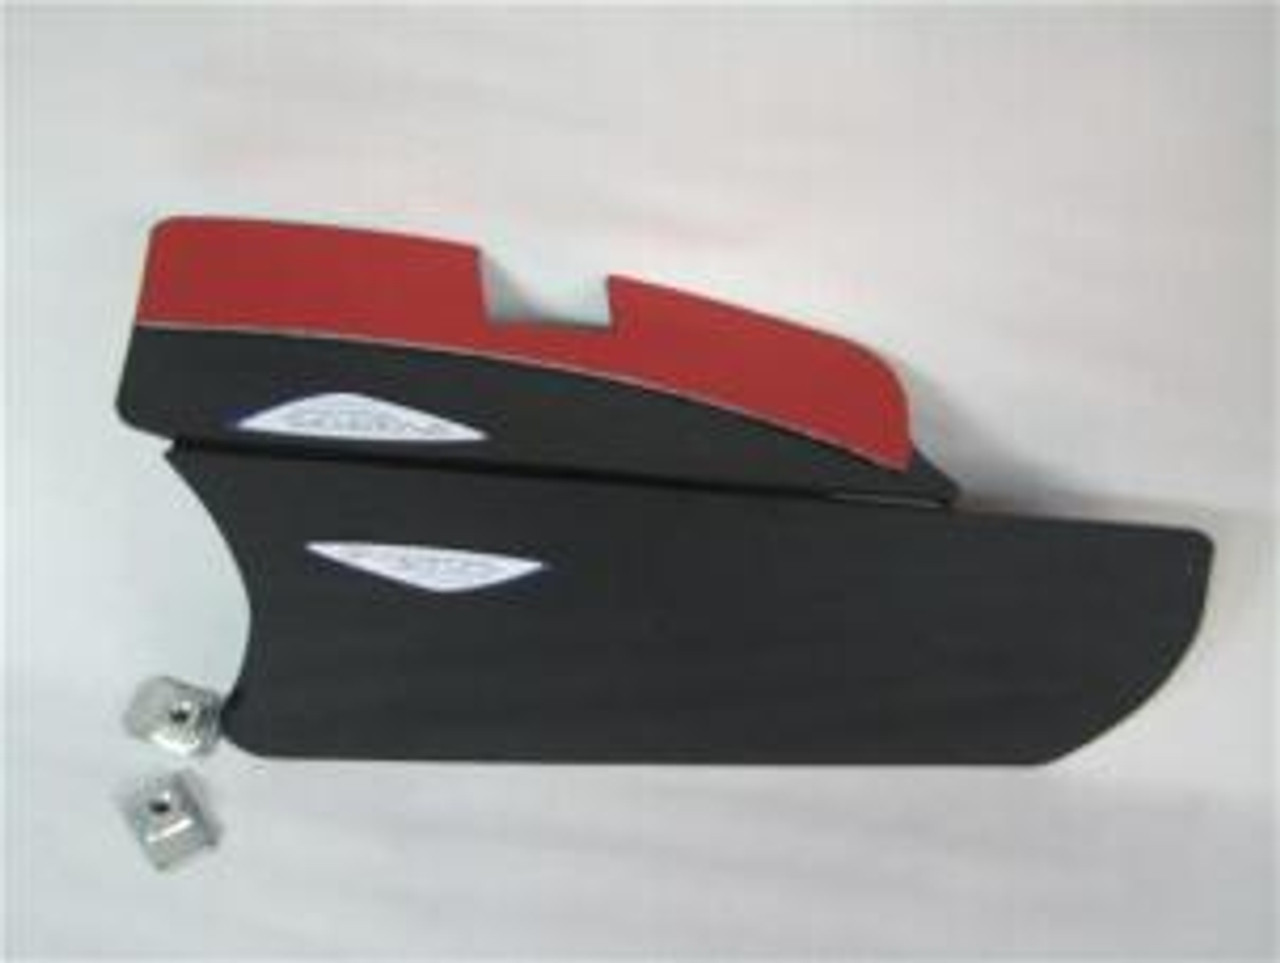 Can-Am Spyder RT Missing Belt Guard 2014-Present with 1330 Engine (SPY-149) Lamonster Approved